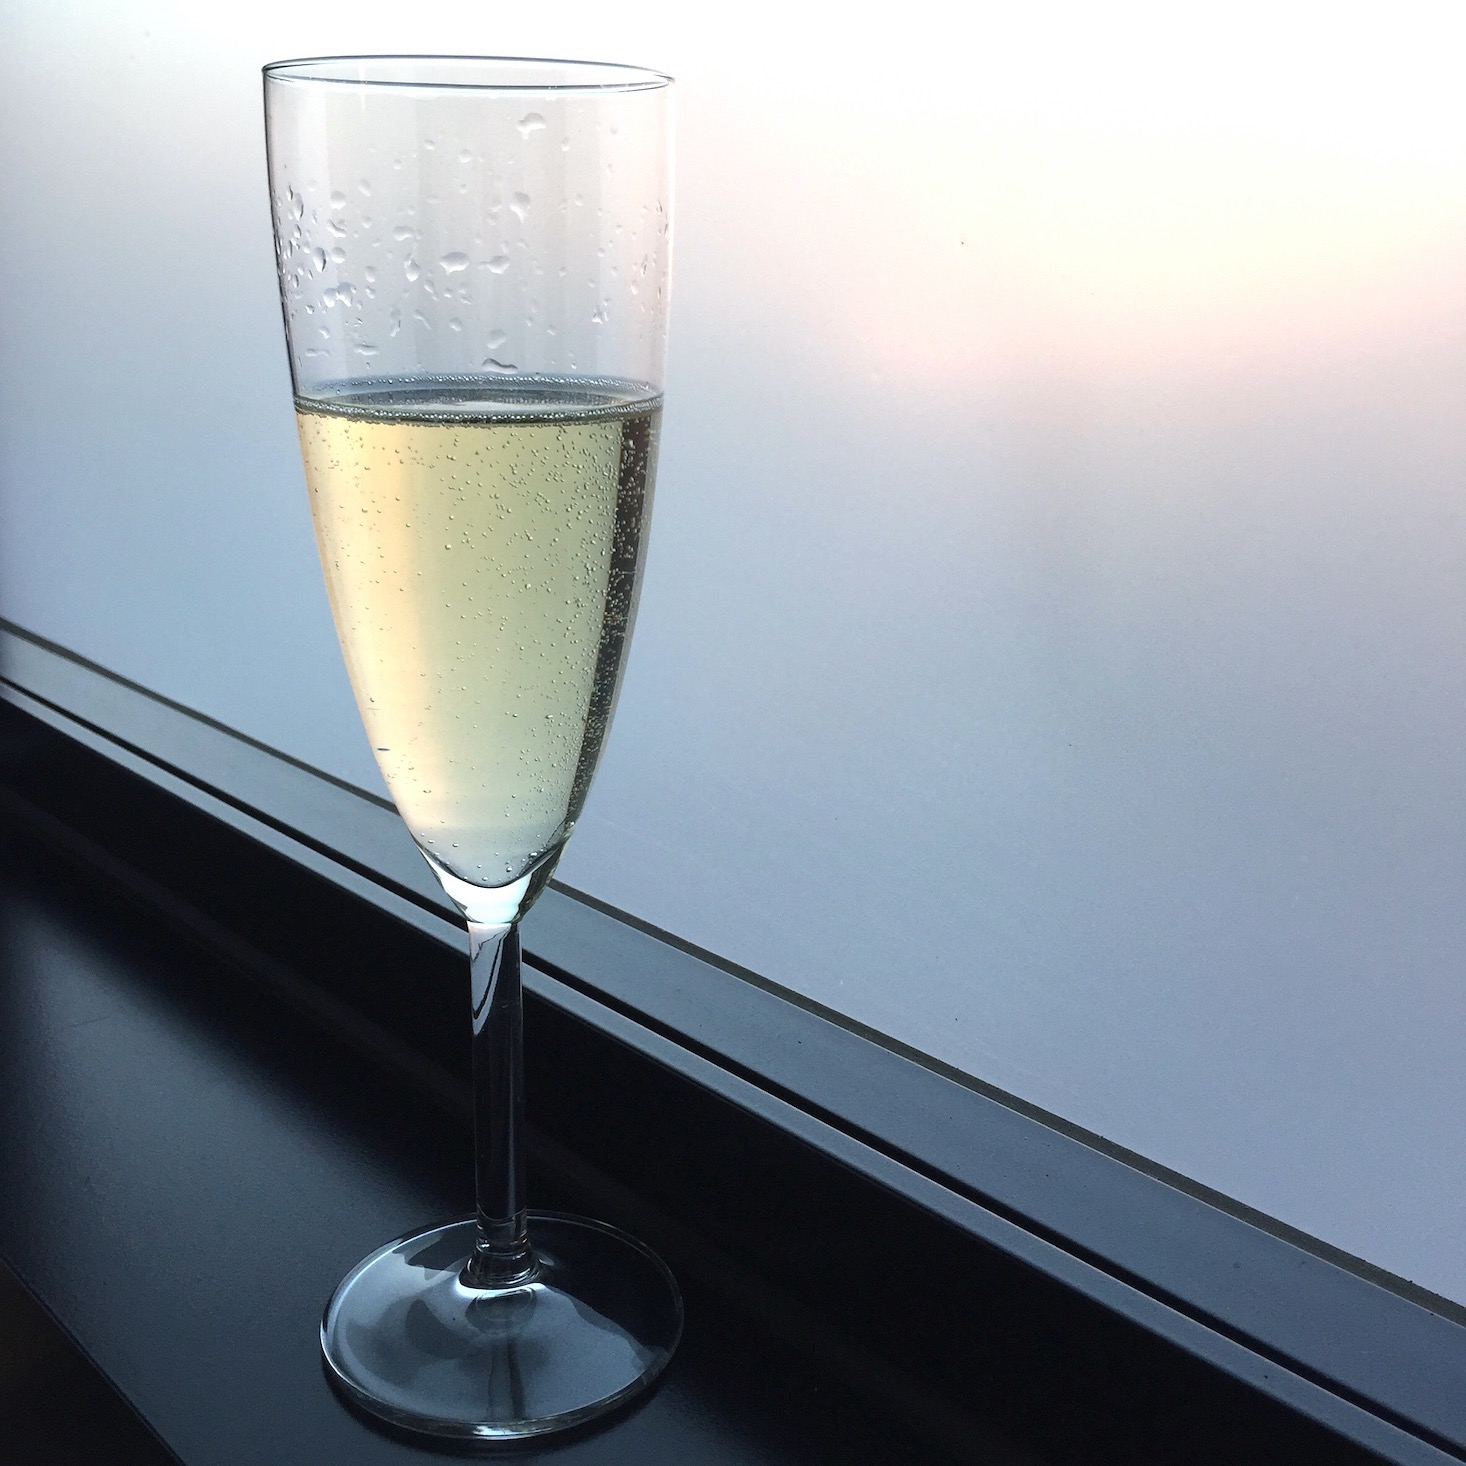 robb-vices-december-2016-prosecco-poured